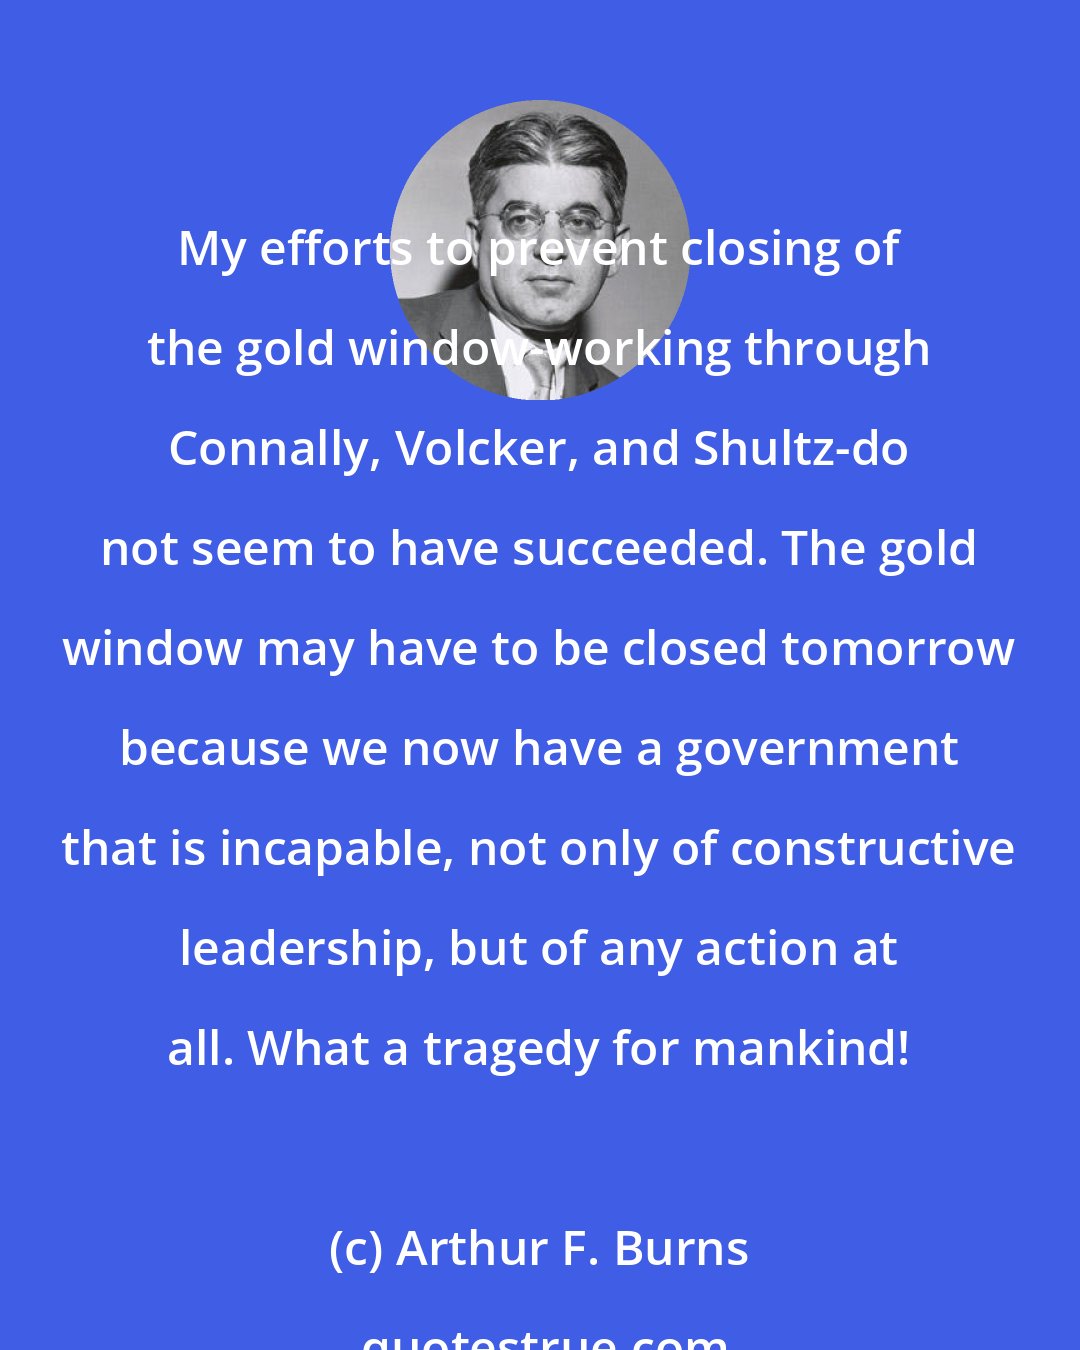 Arthur F. Burns: My efforts to prevent closing of the gold window-working through Connally, Volcker, and Shultz-do not seem to have succeeded. The gold window may have to be closed tomorrow because we now have a government that is incapable, not only of constructive leadership, but of any action at all. What a tragedy for mankind!